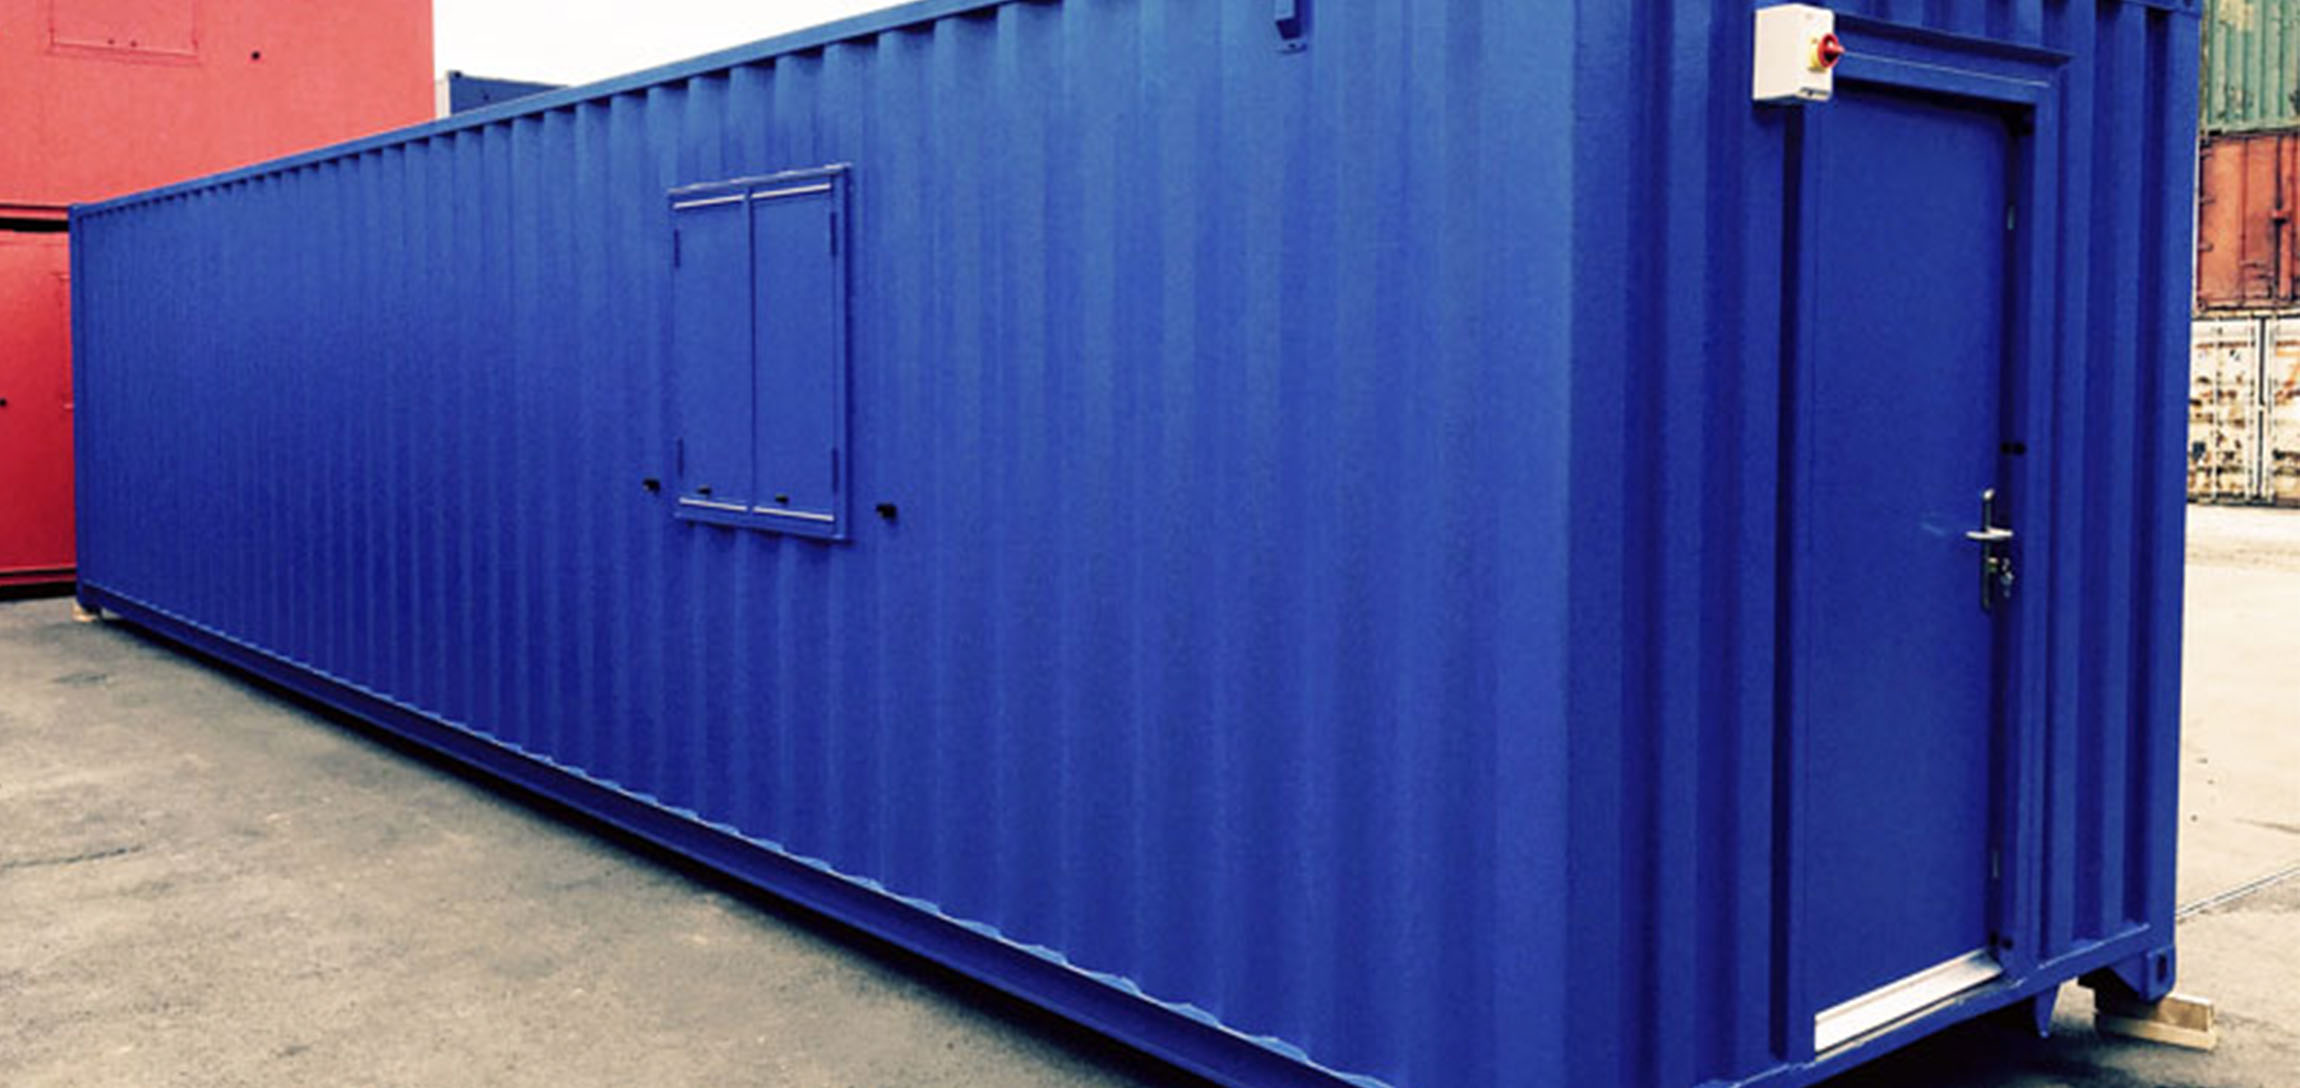 UK Providers of Bespoke Office Containers